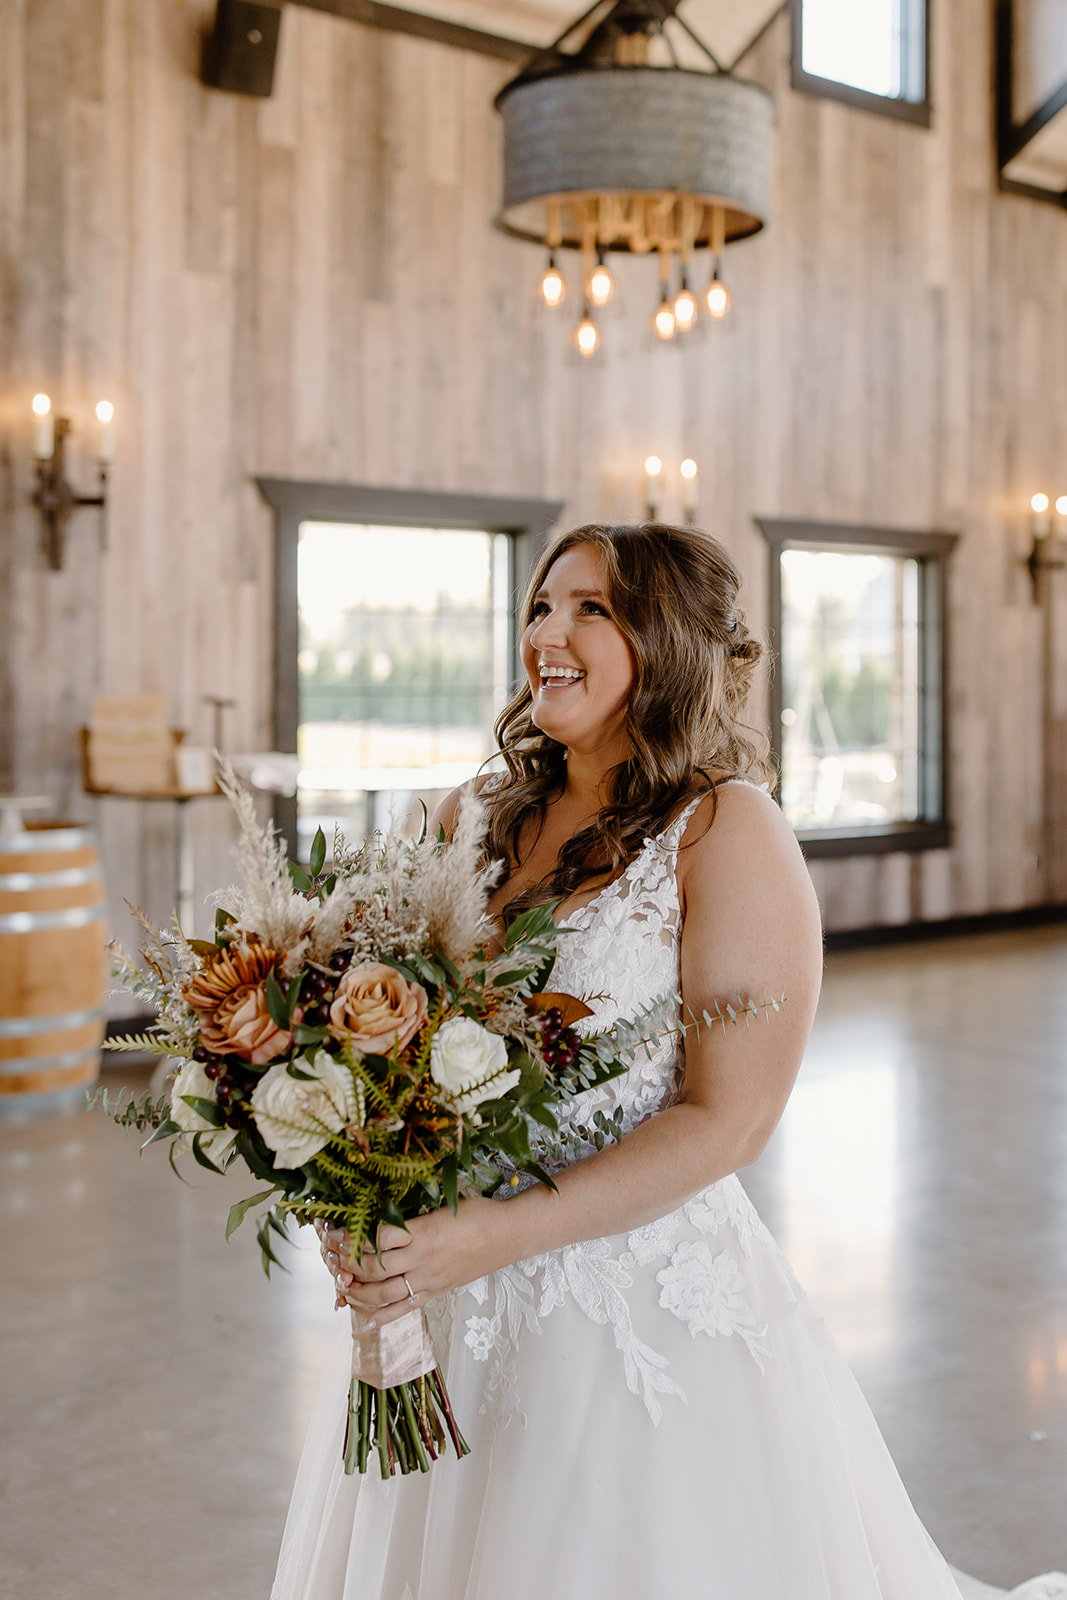 Bride smiles up at her bridesmaids while holding her bouquet